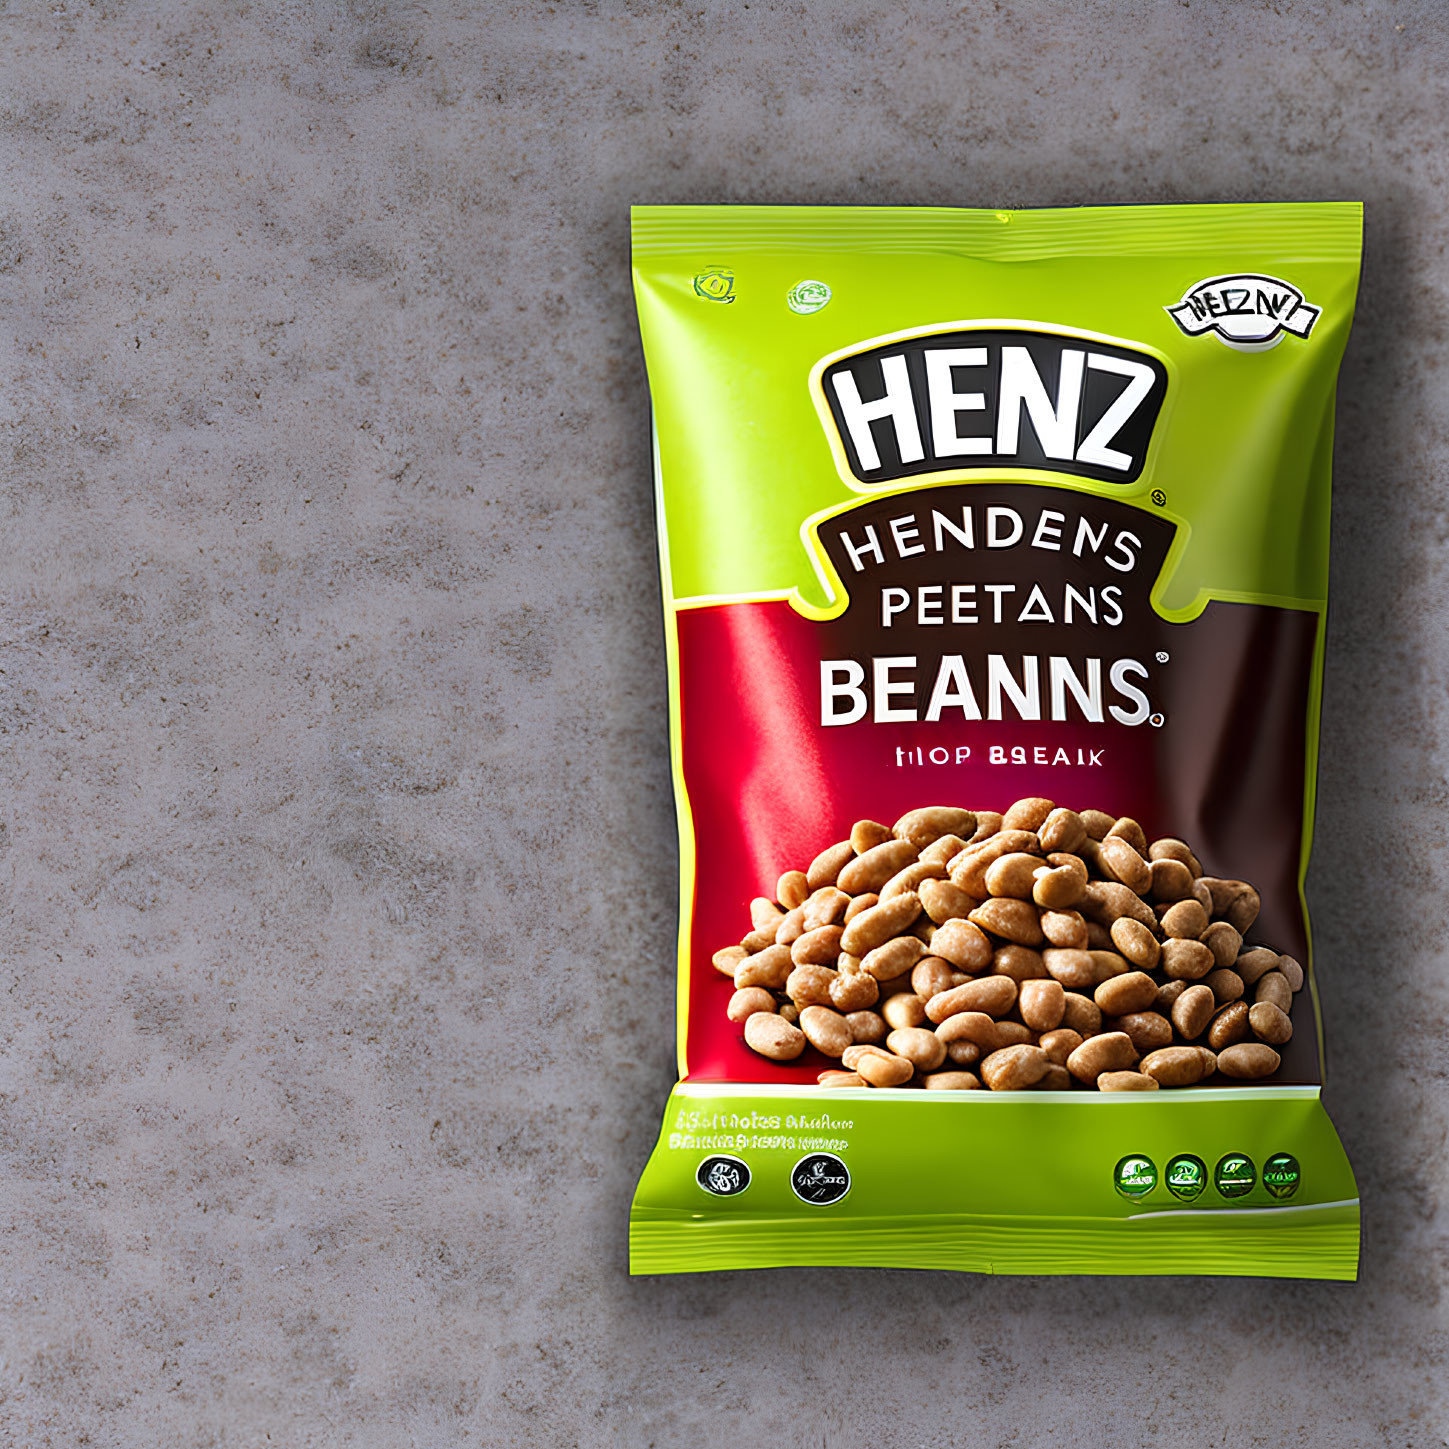 Heinz Beans Package on Textured Grey Surface